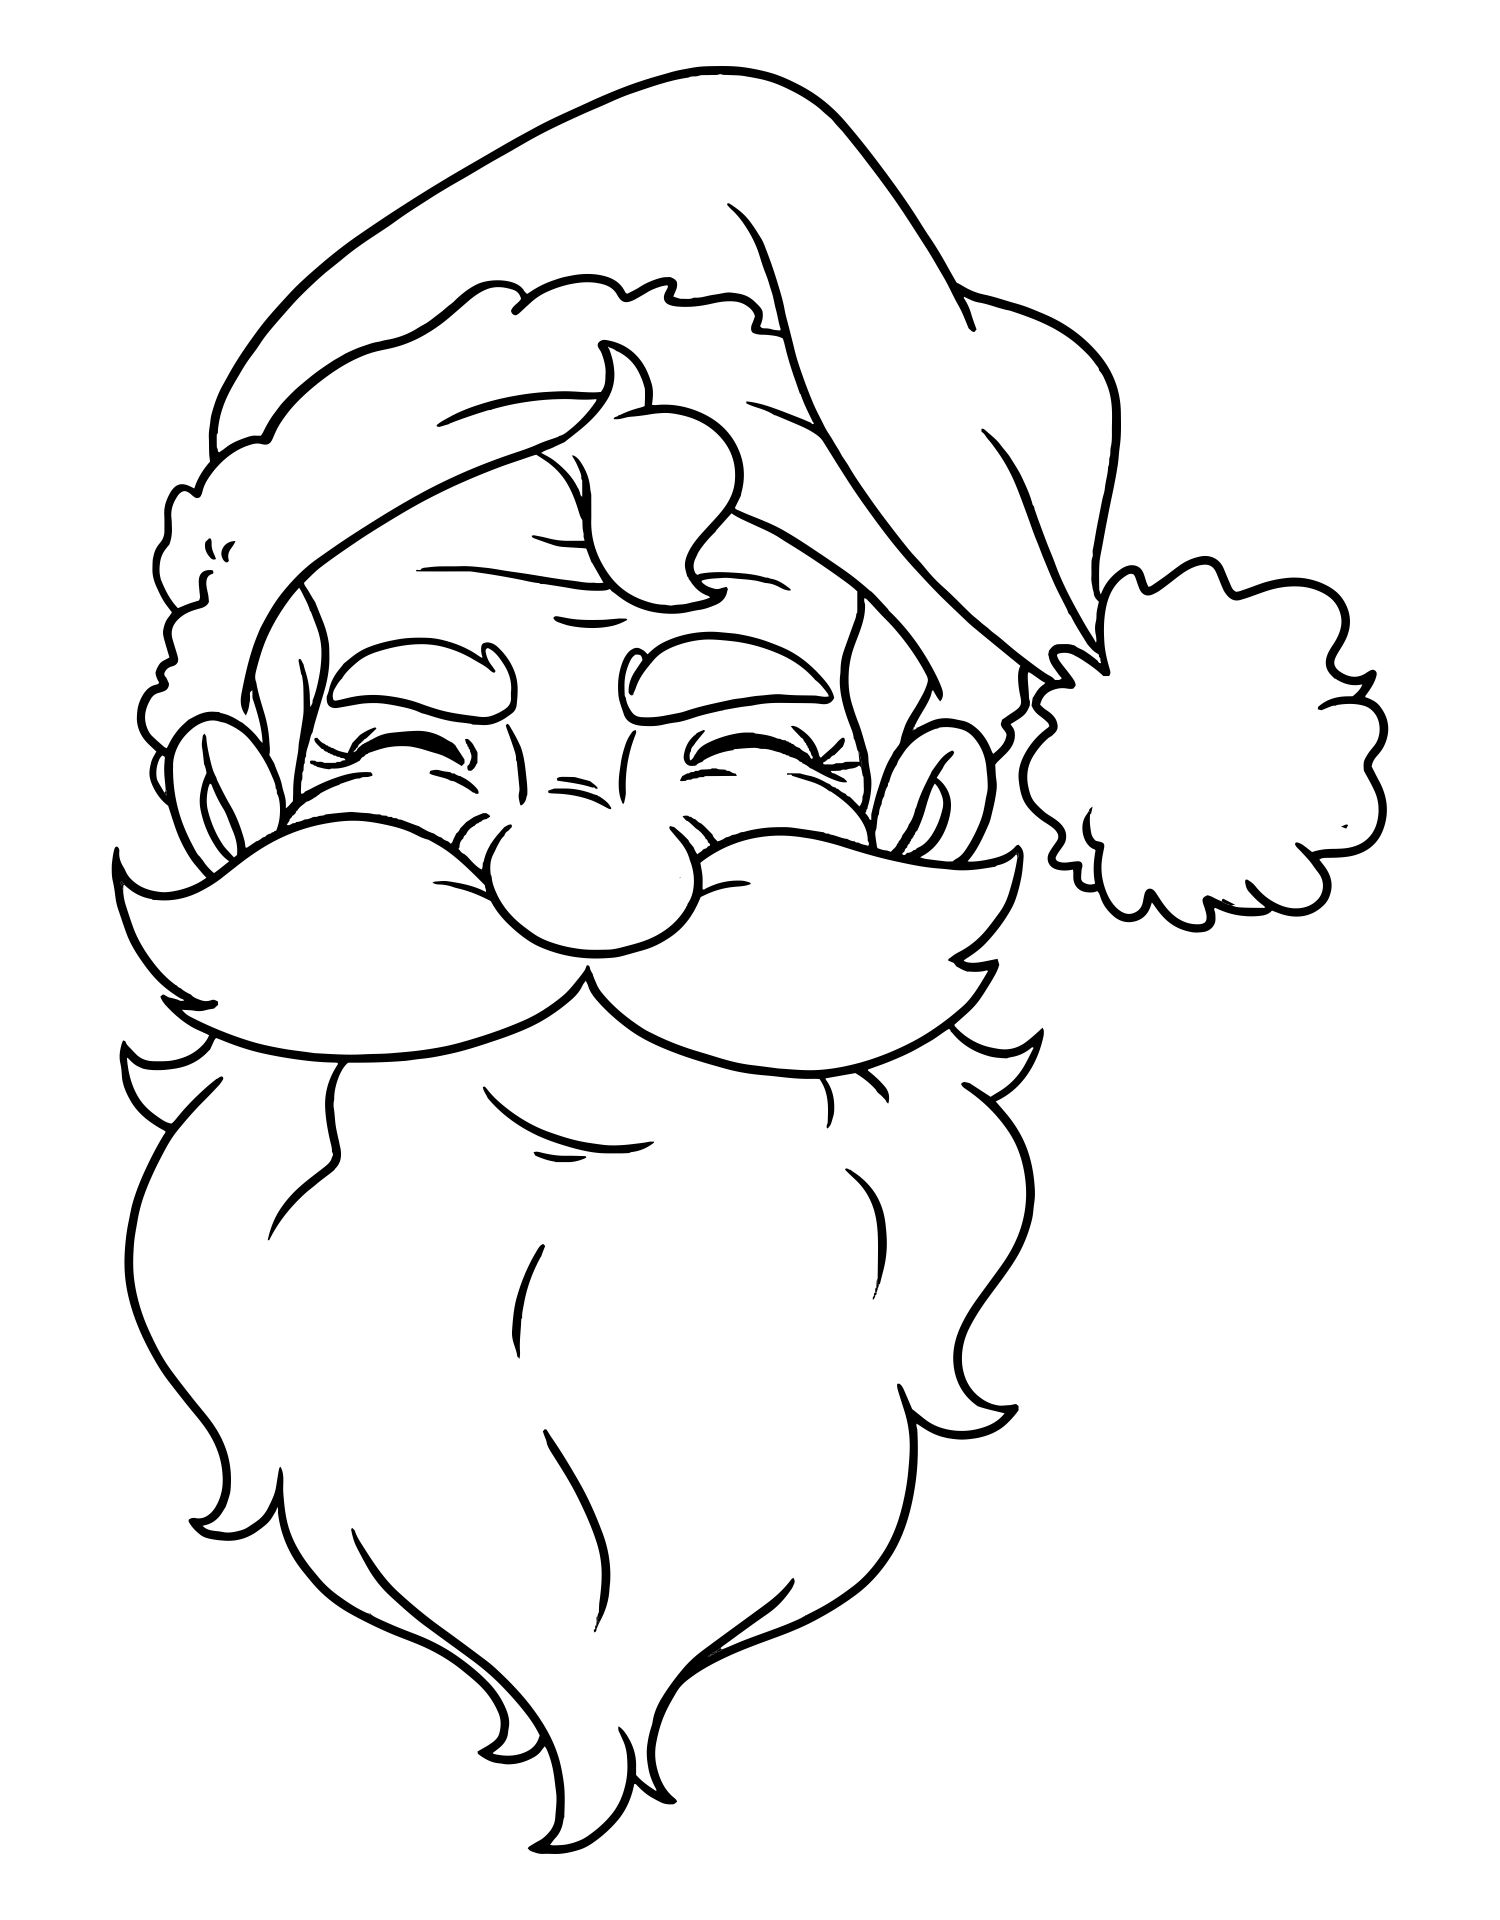 Printable Santa Claus Coloring Pages For Kids